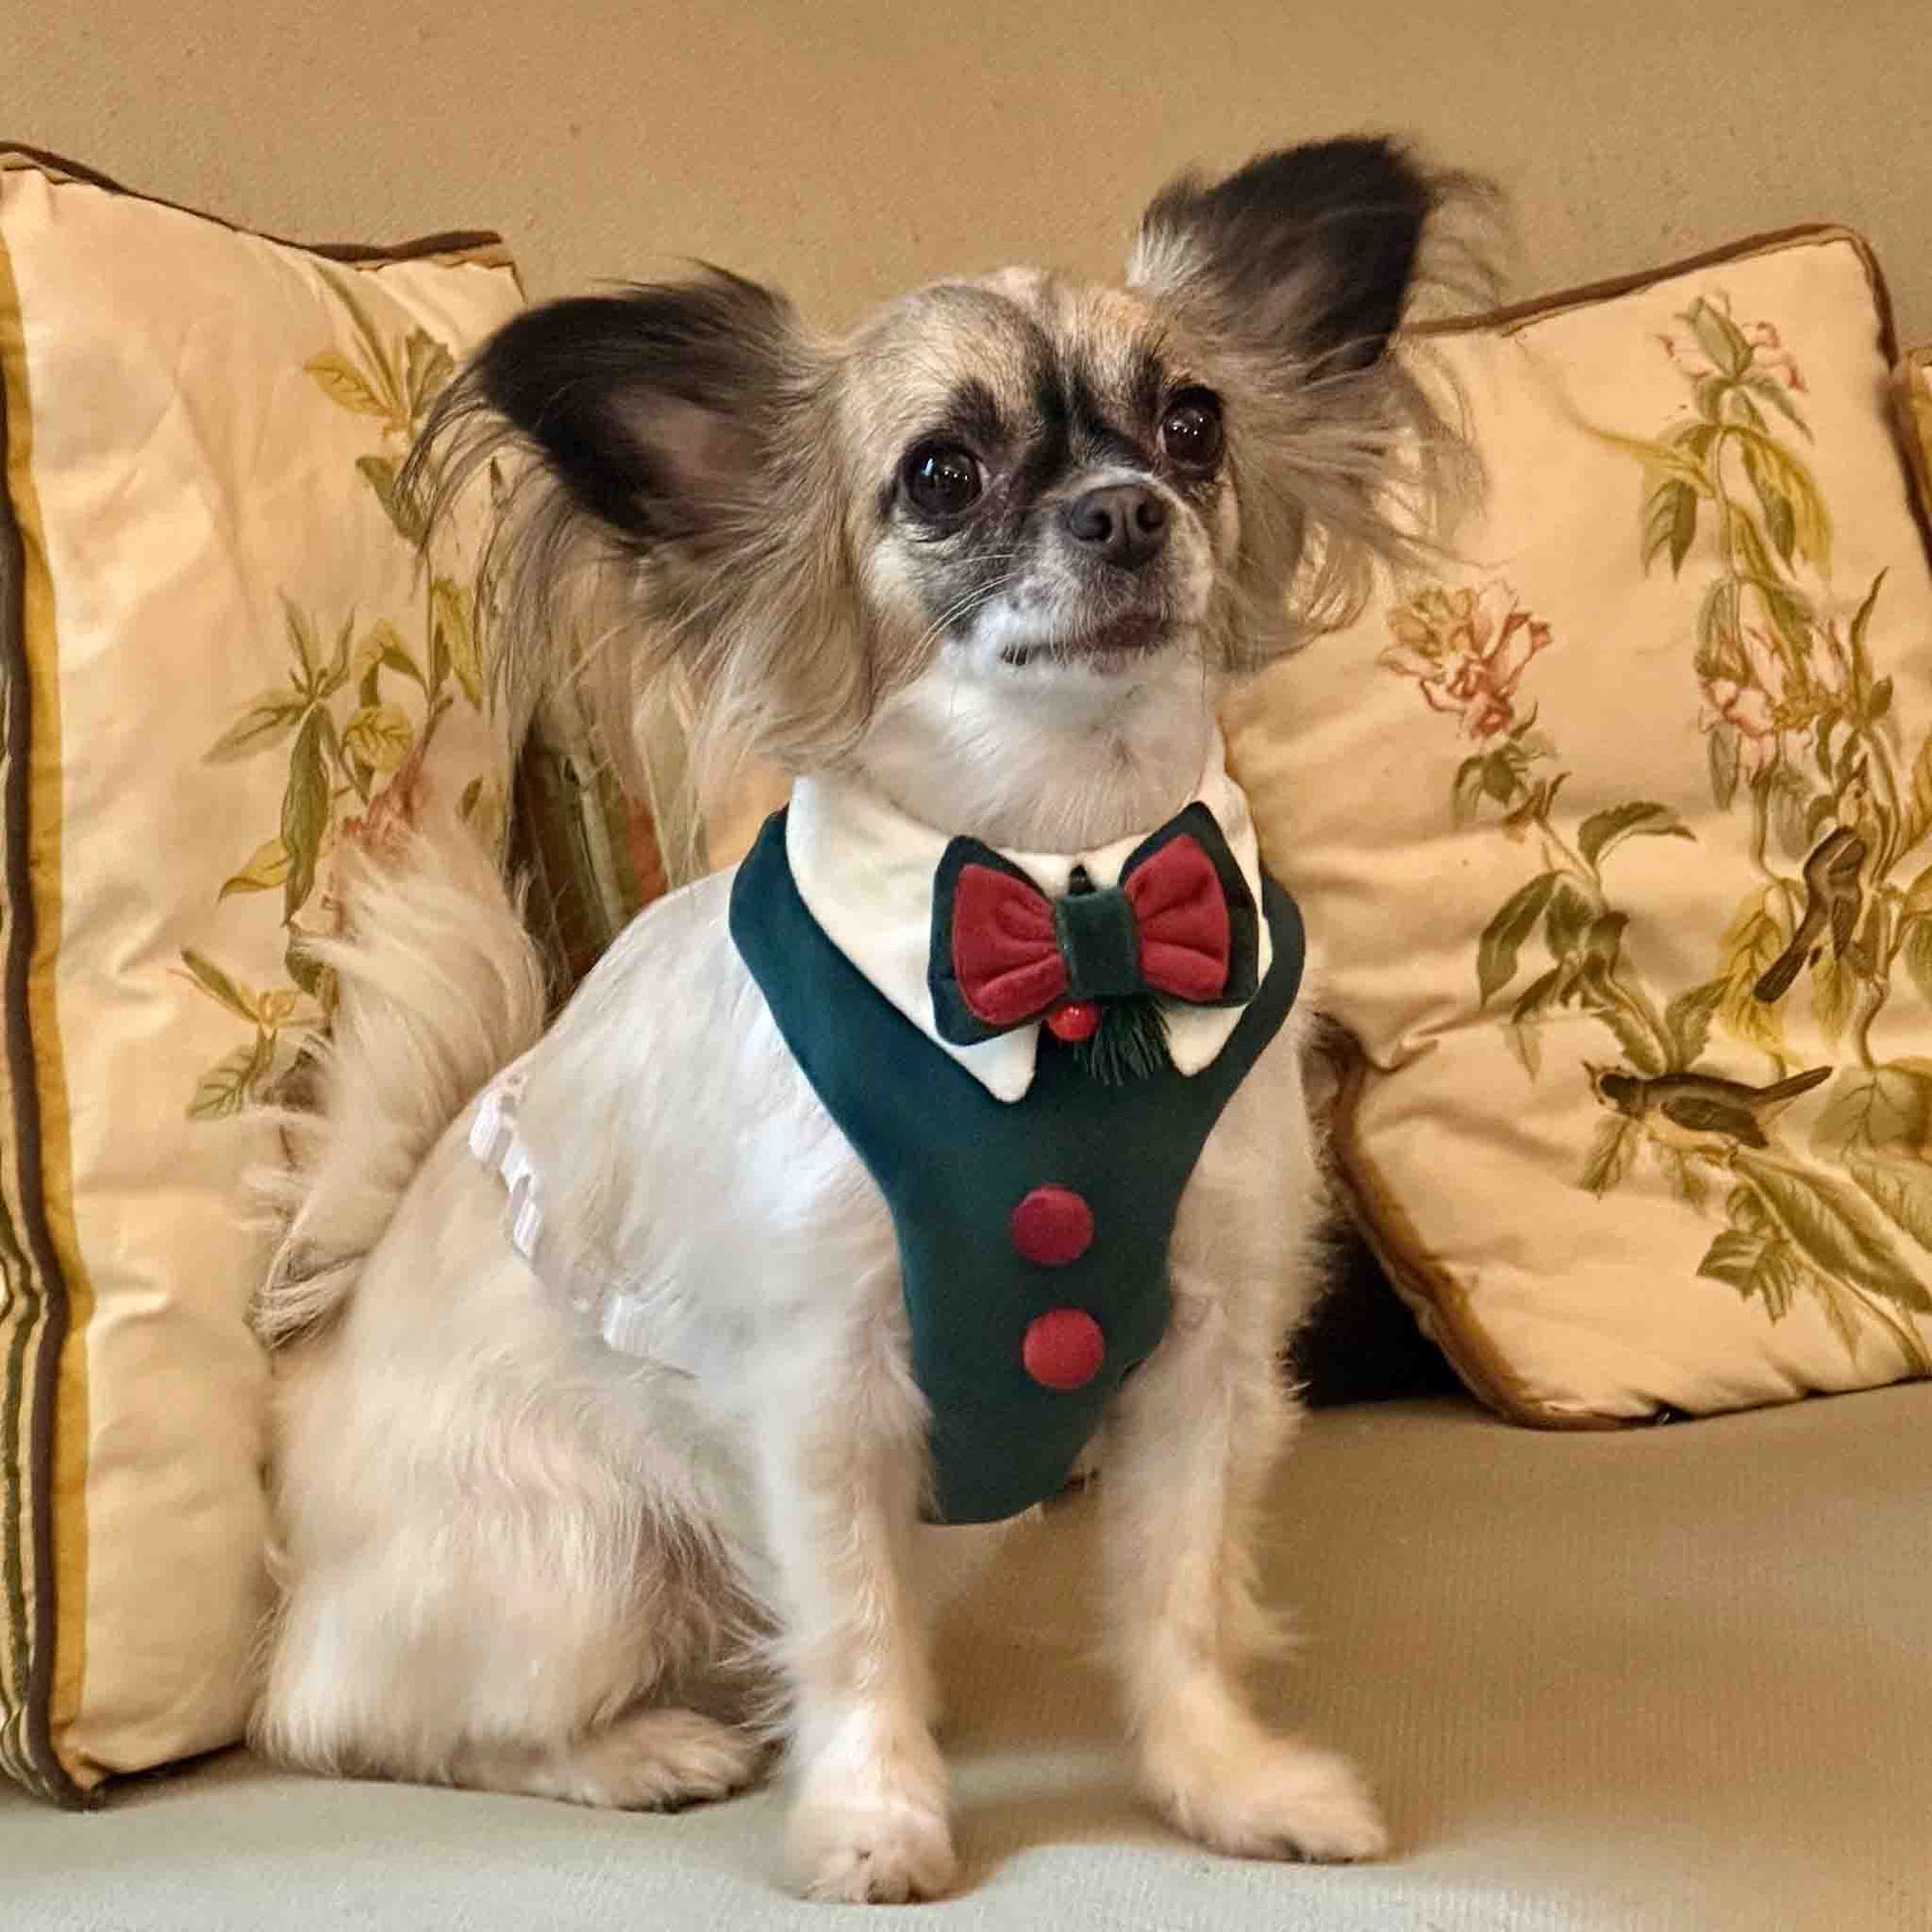 a little chihuahua in a green and red Christmas dress sitting on a sofa.